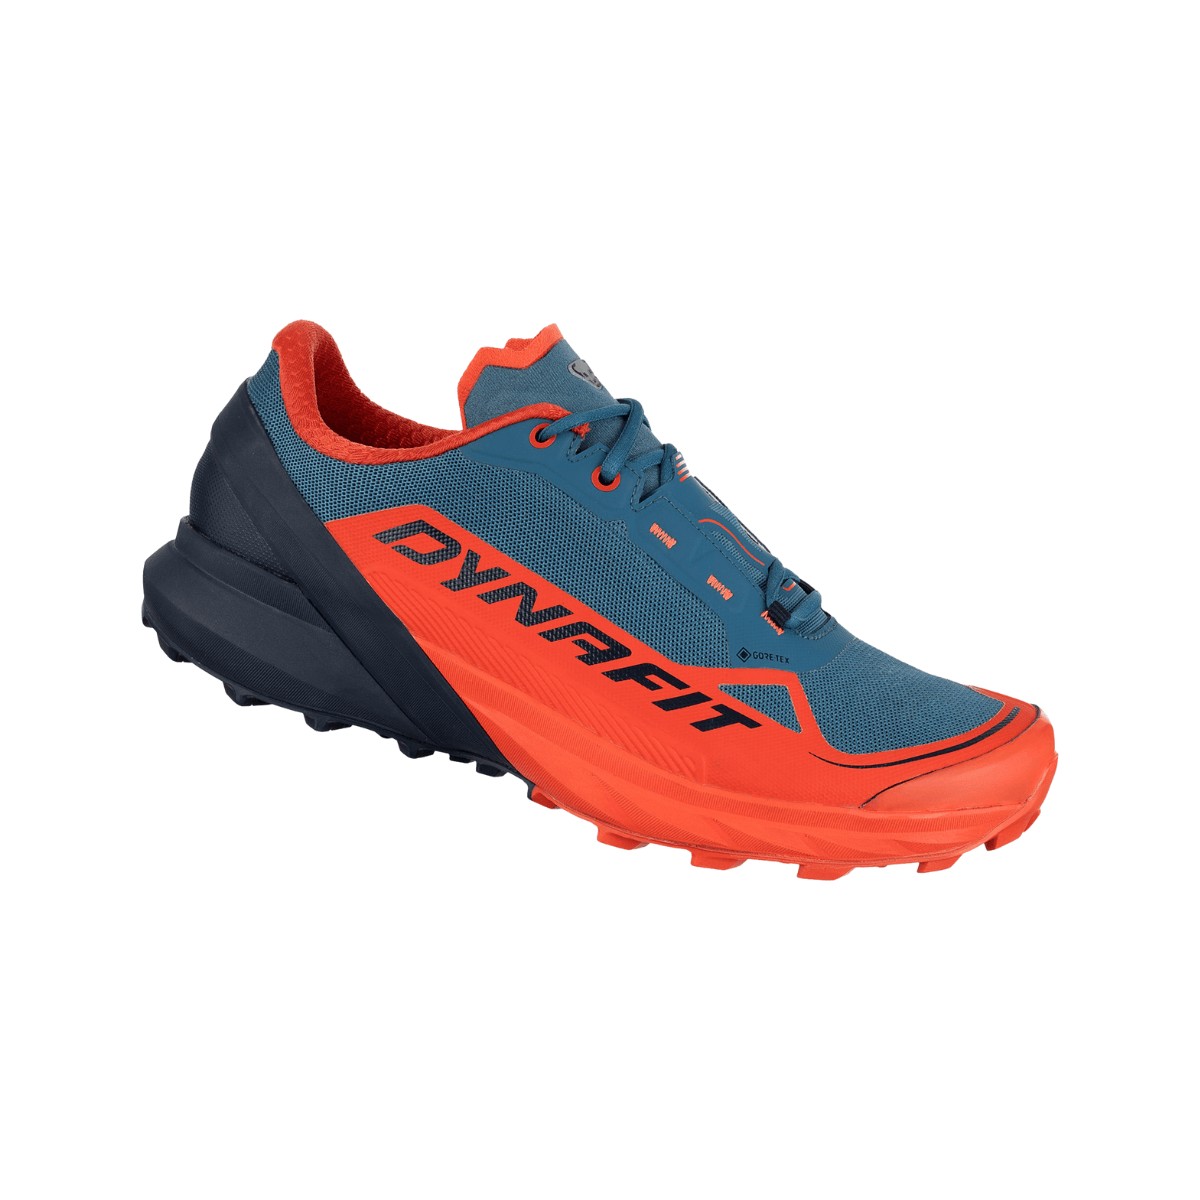 Chaussures Dynafit Ultra 50 GTX Bleu Rouge AW22, Taille 42 - EUR